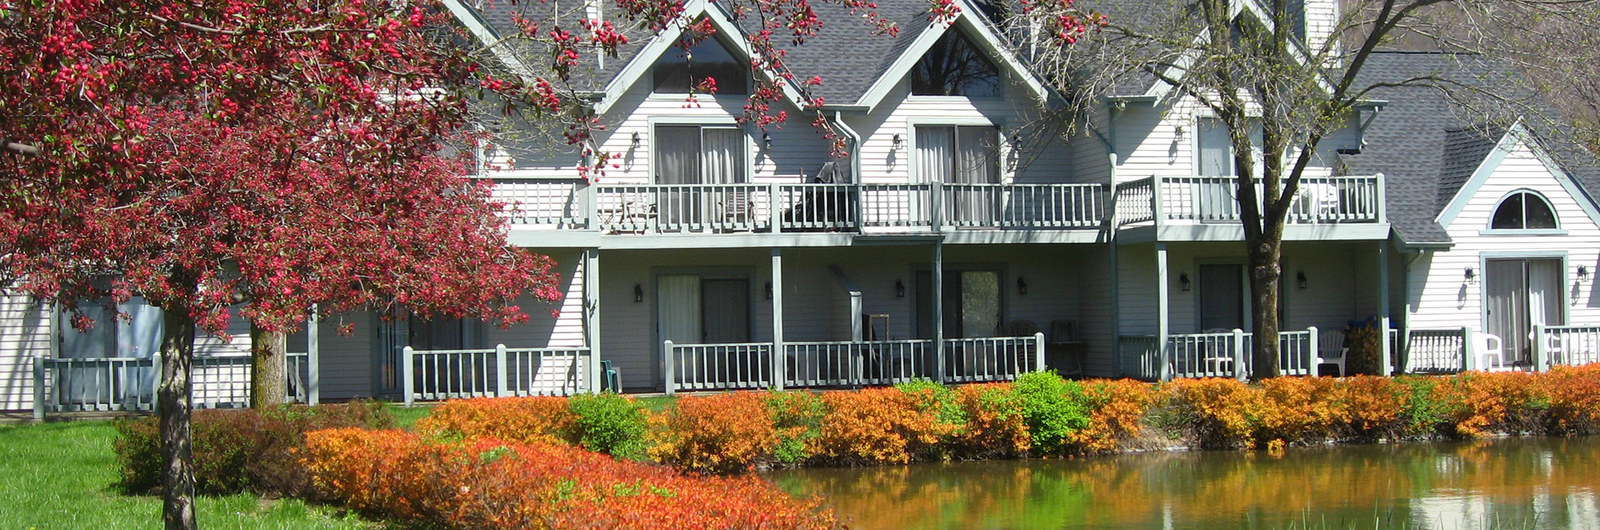 Row of townhomes on edge of pond in Ellicottville New York